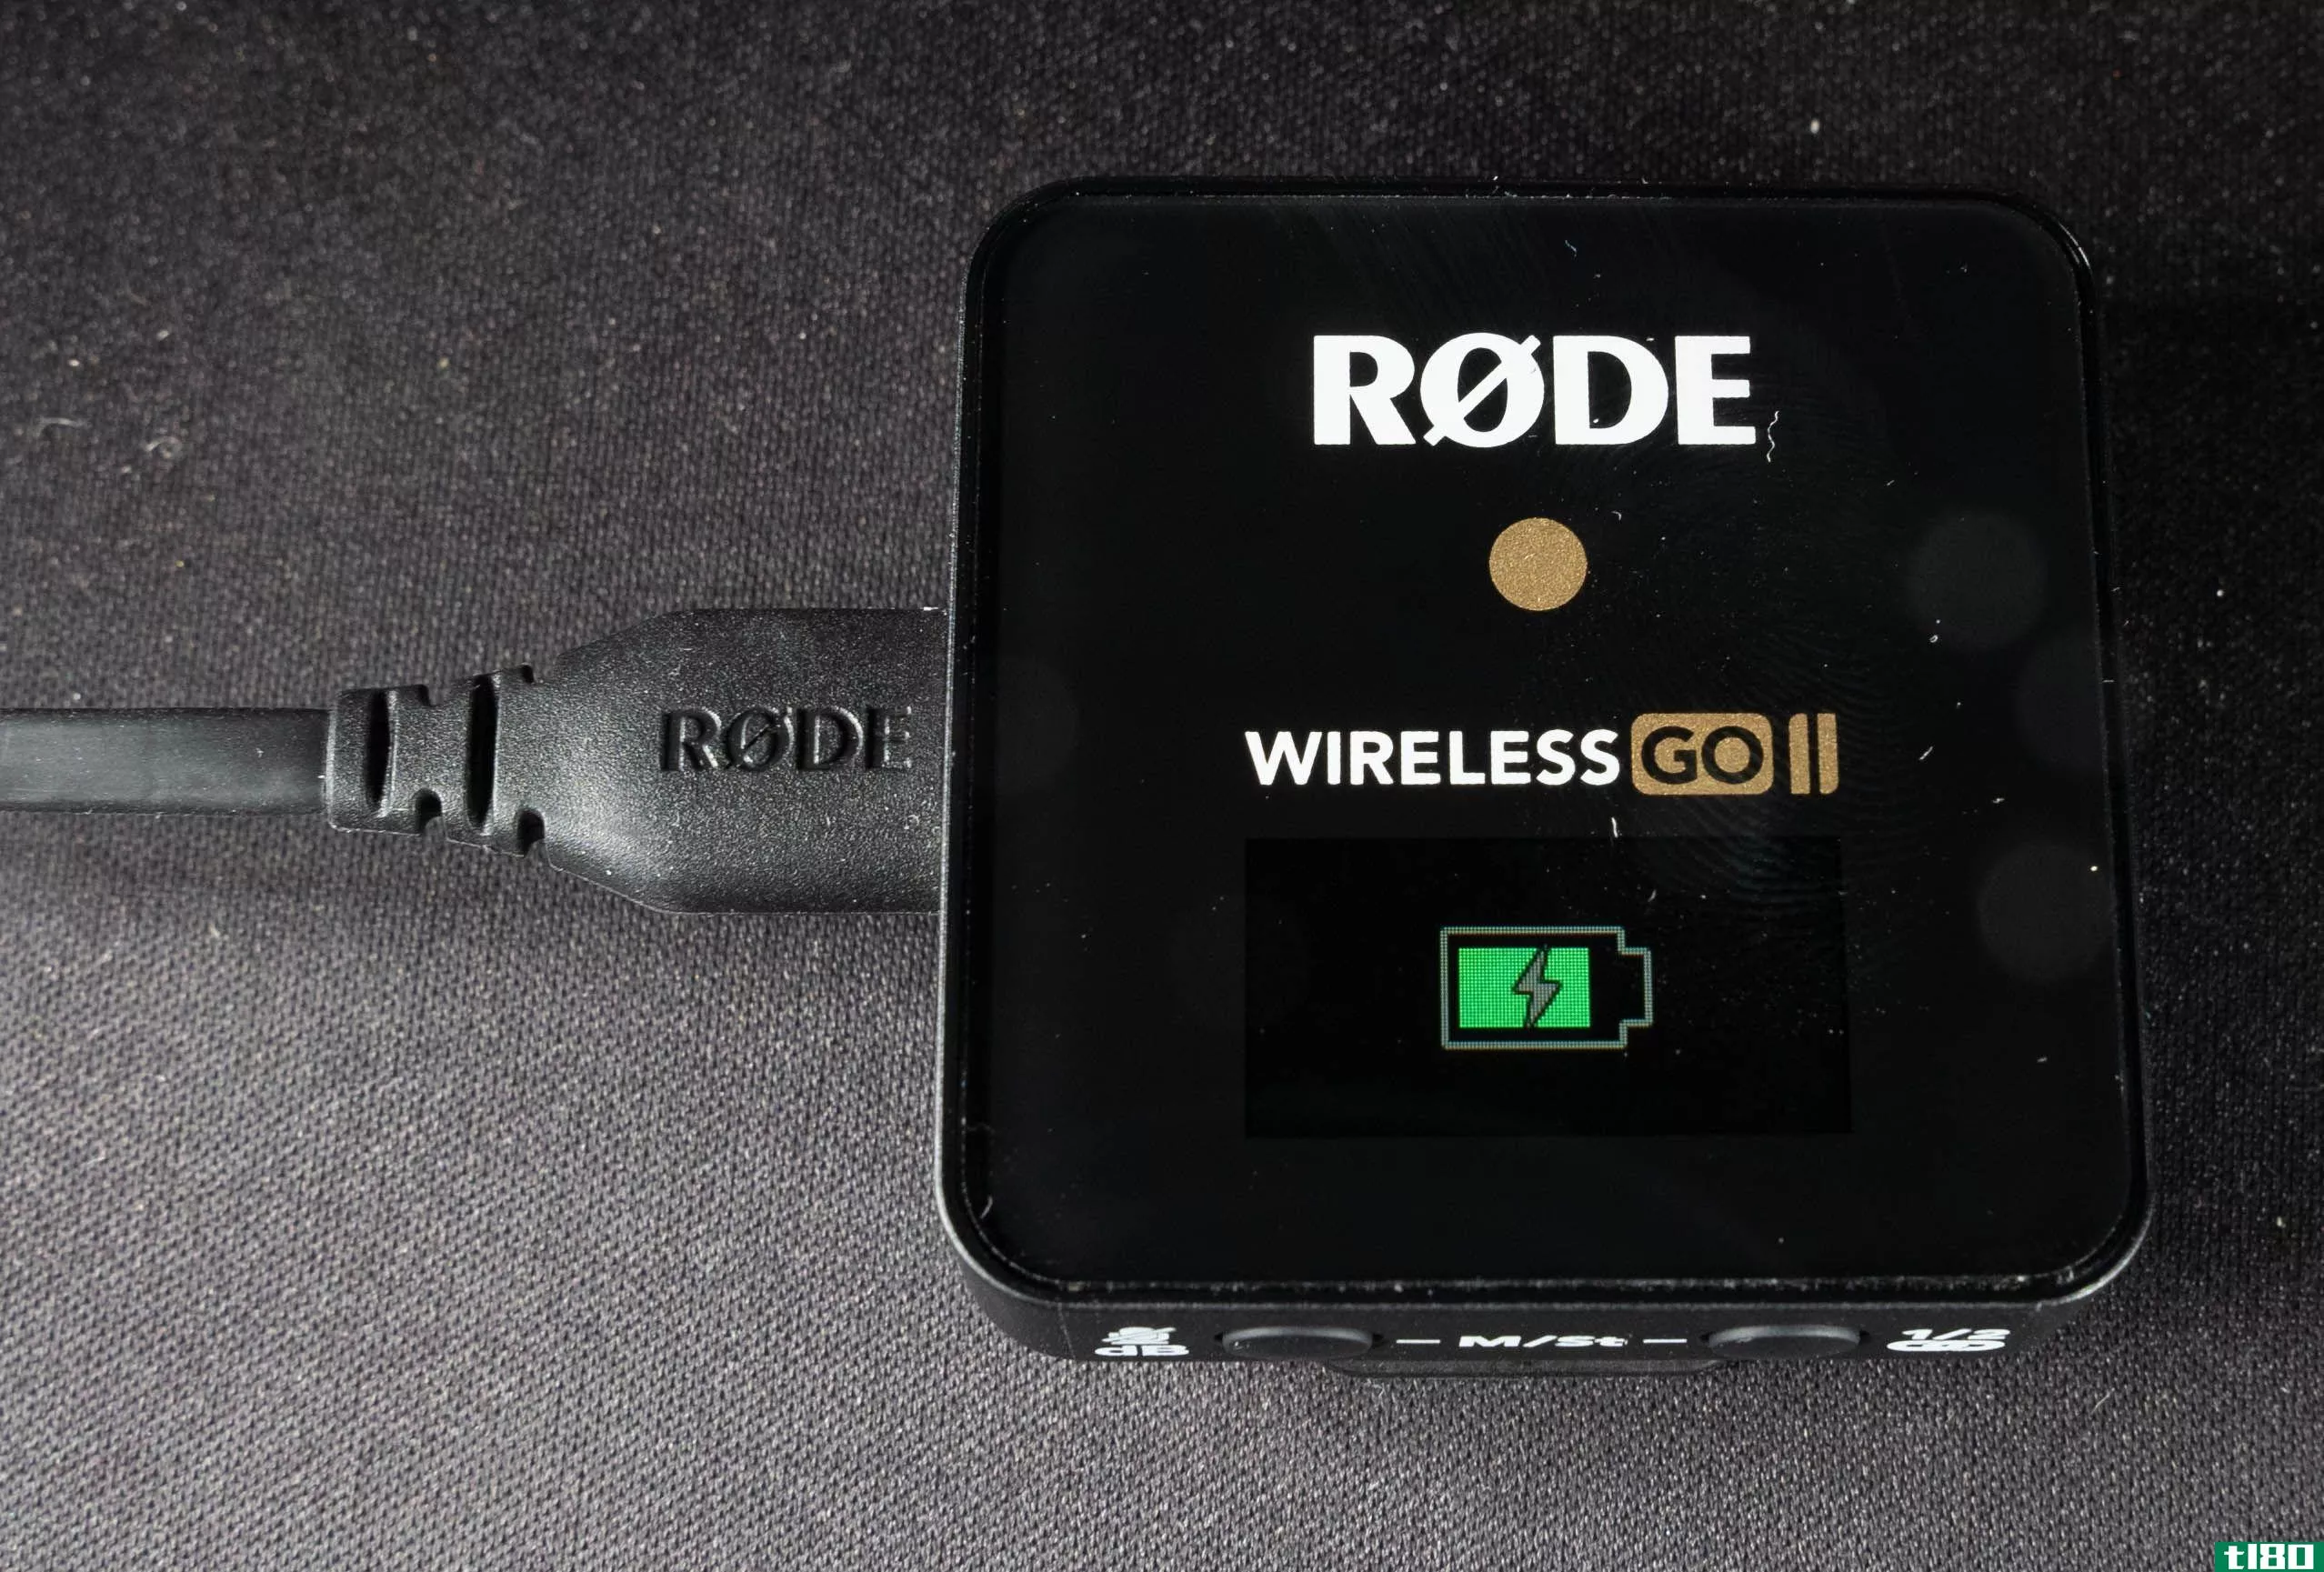 Rode Wireless Go II Tran**itter Connected to PC